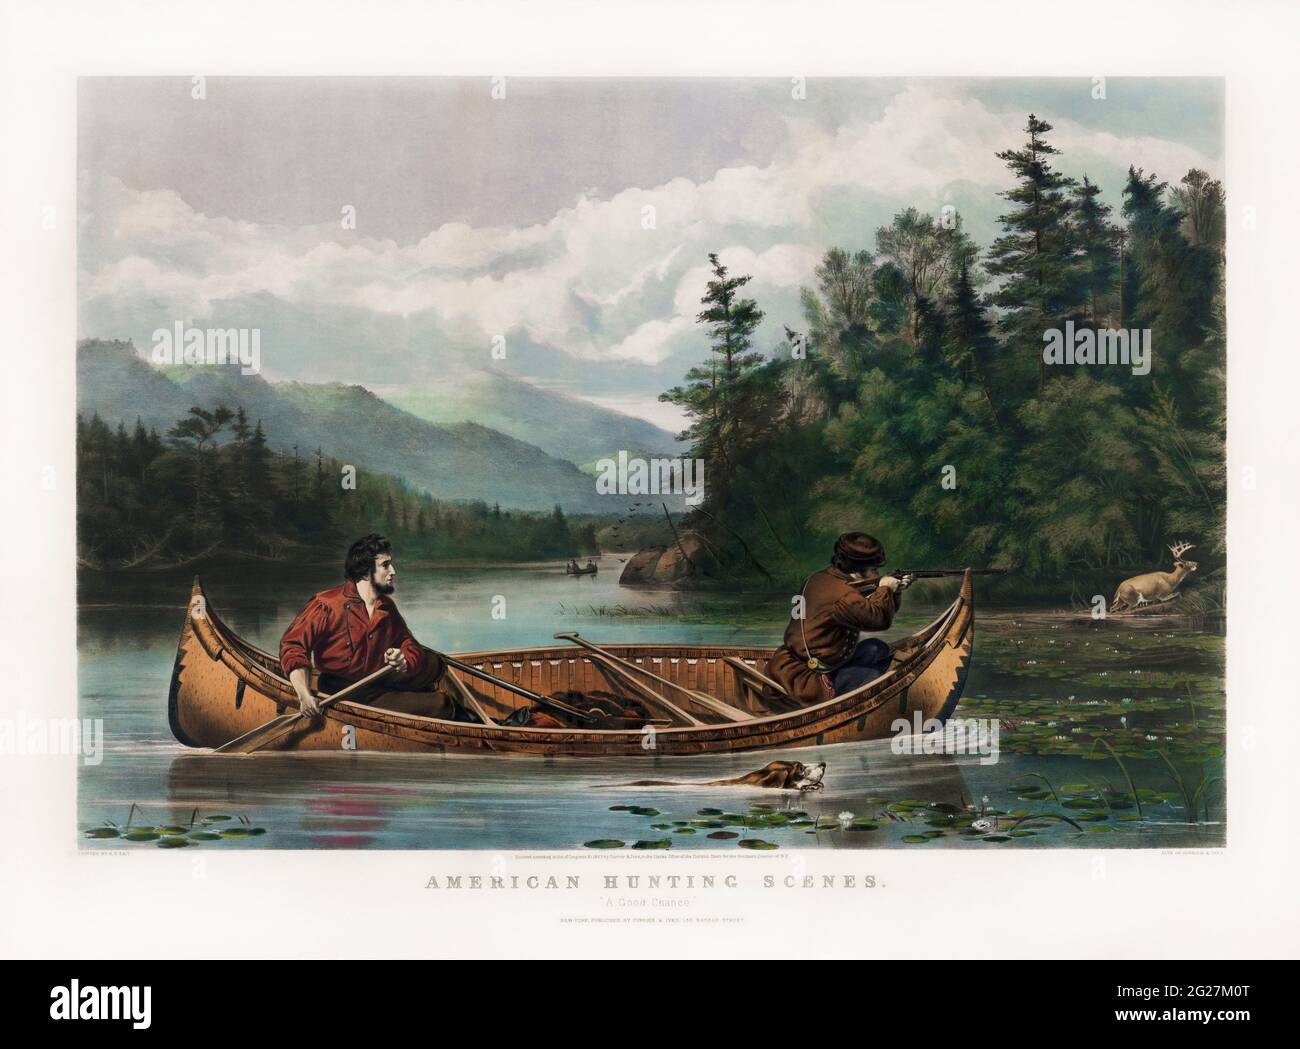 Two hunters in a canoe, with one paddling and the other firing his rifle at a moose on shore. Stock Photo